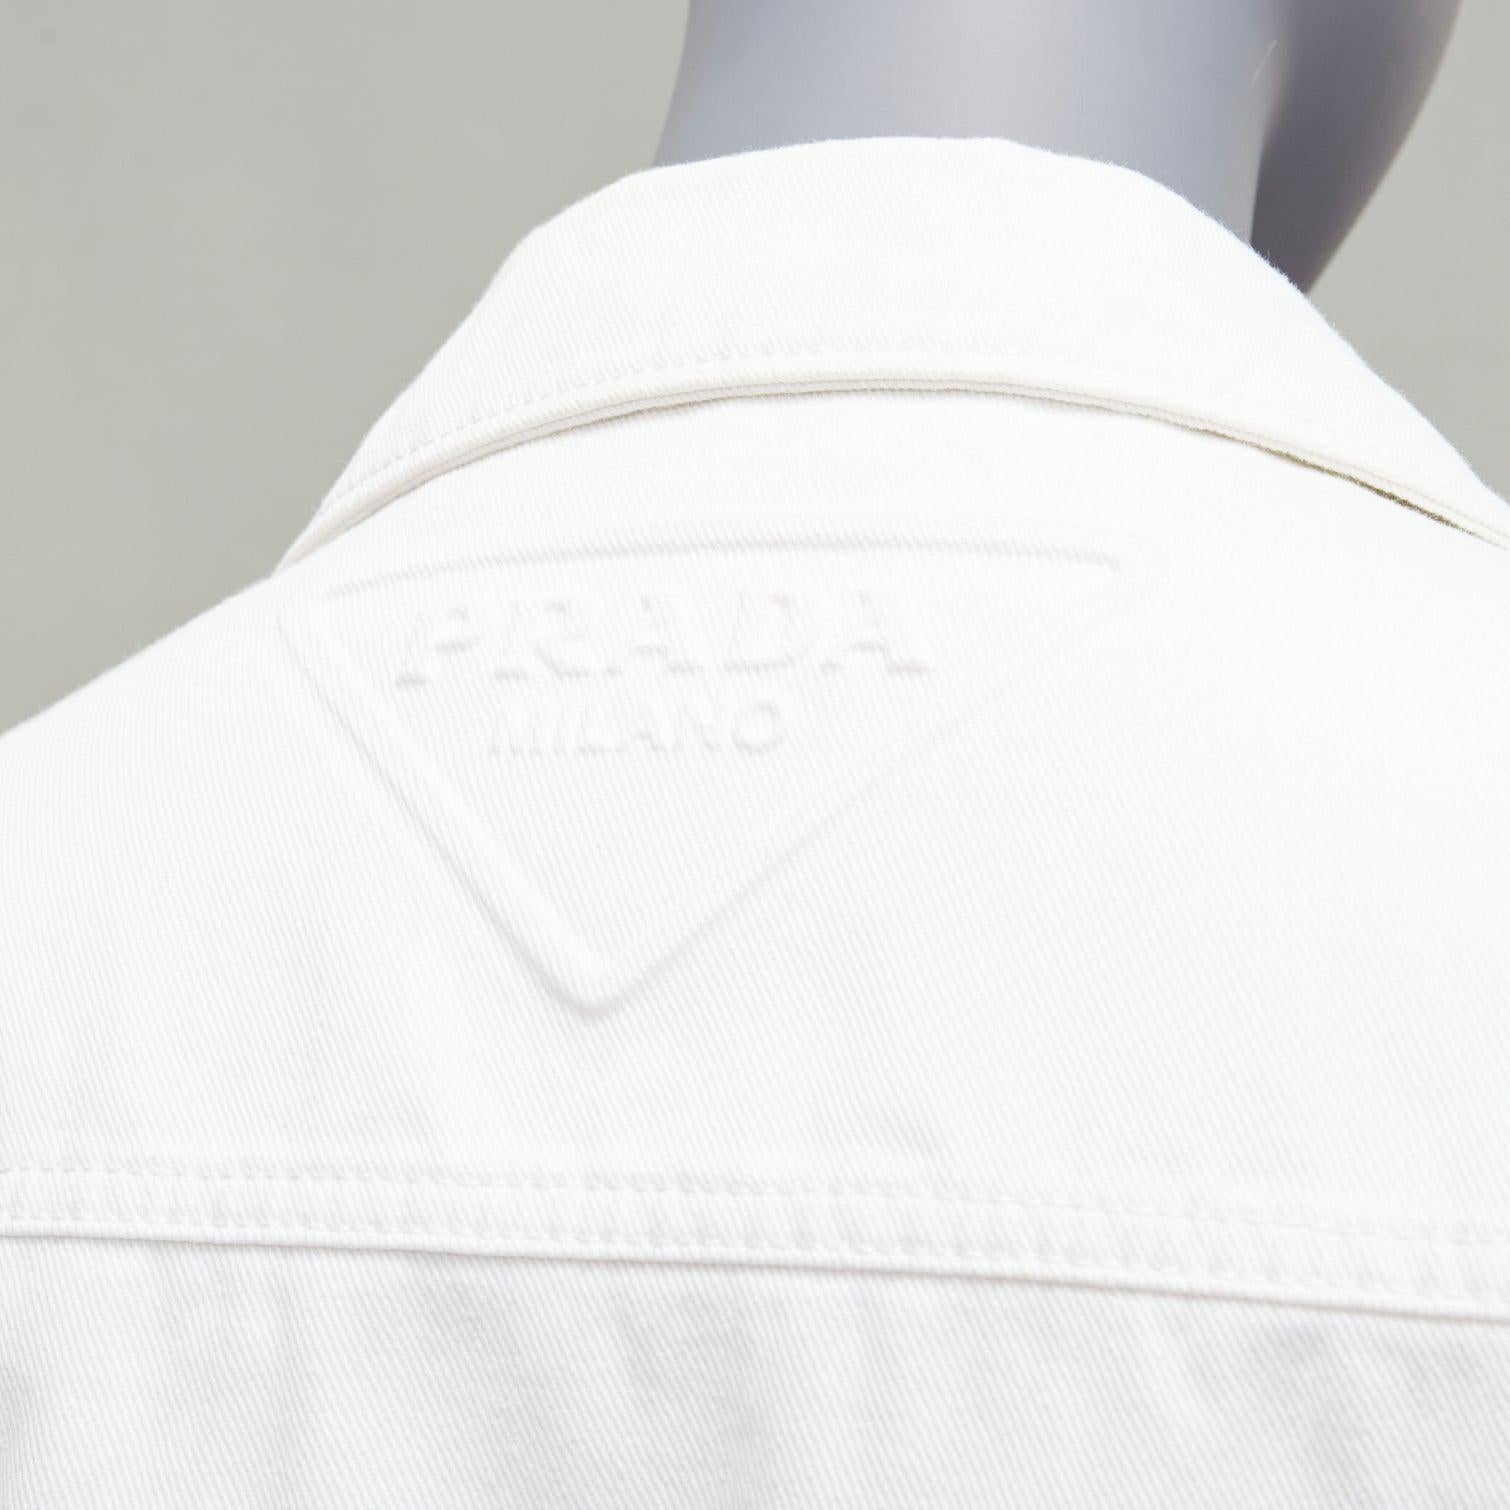 PRADA 2021 white denim 3D logo back pocketed cropped zip up jacket M
Reference: JACG/A00155
Brand: Prada
Designer: Miuccia Prada
Collection: 2021
Material: Cotton
Color: White
Pattern: Solid
Closure: Zip
Made in: Romania

CONDITION:
Condition: Good,